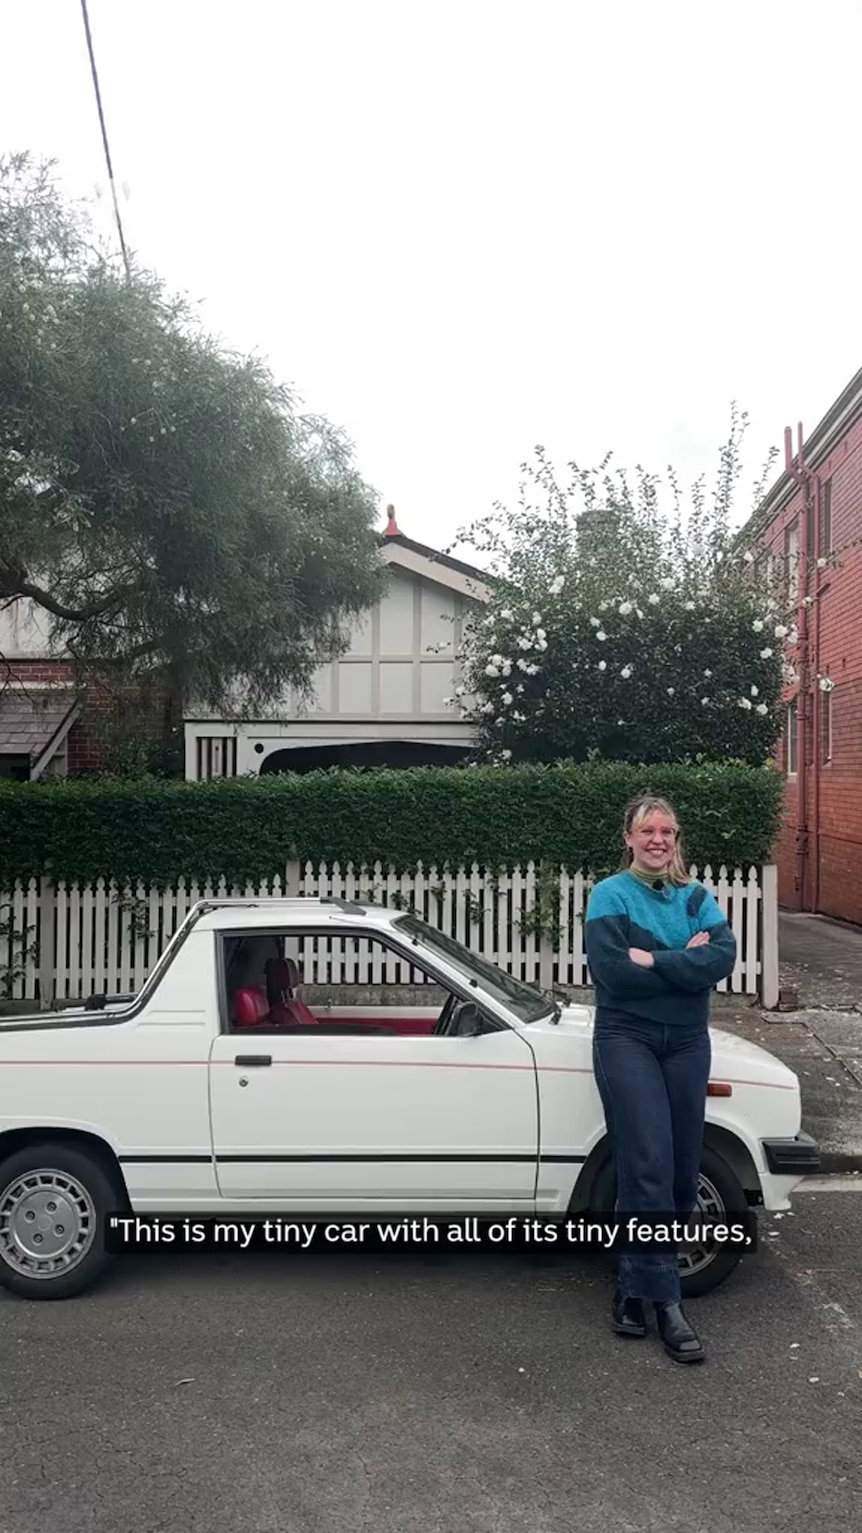 A young woman with light tone skin and dressed in jeans and jumper stands before a small ute parked on a suburban street